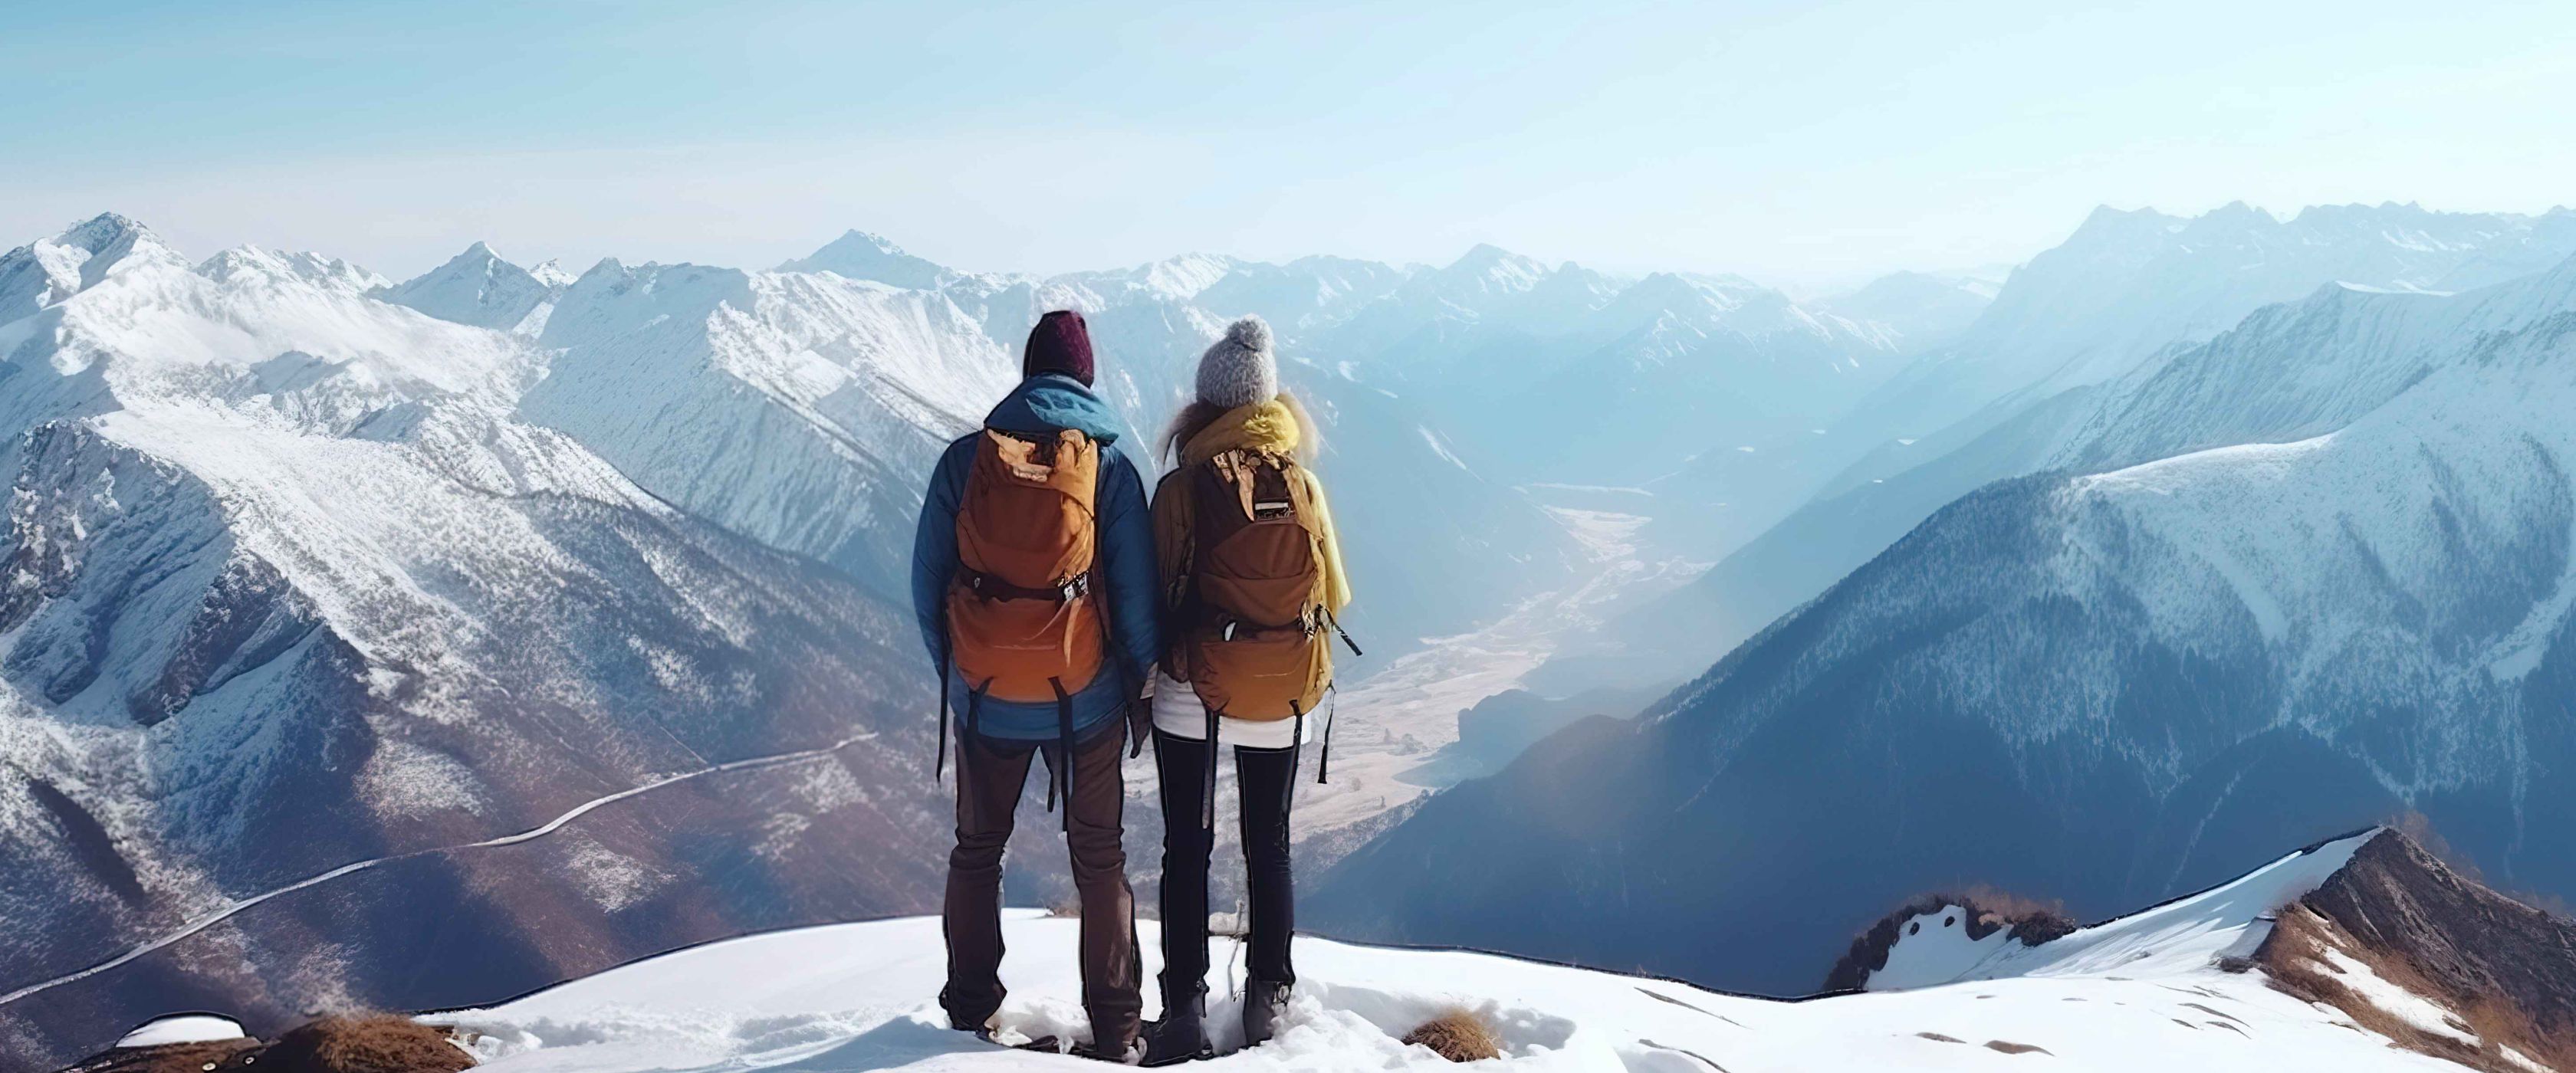 Two people standing on snow capped mountain